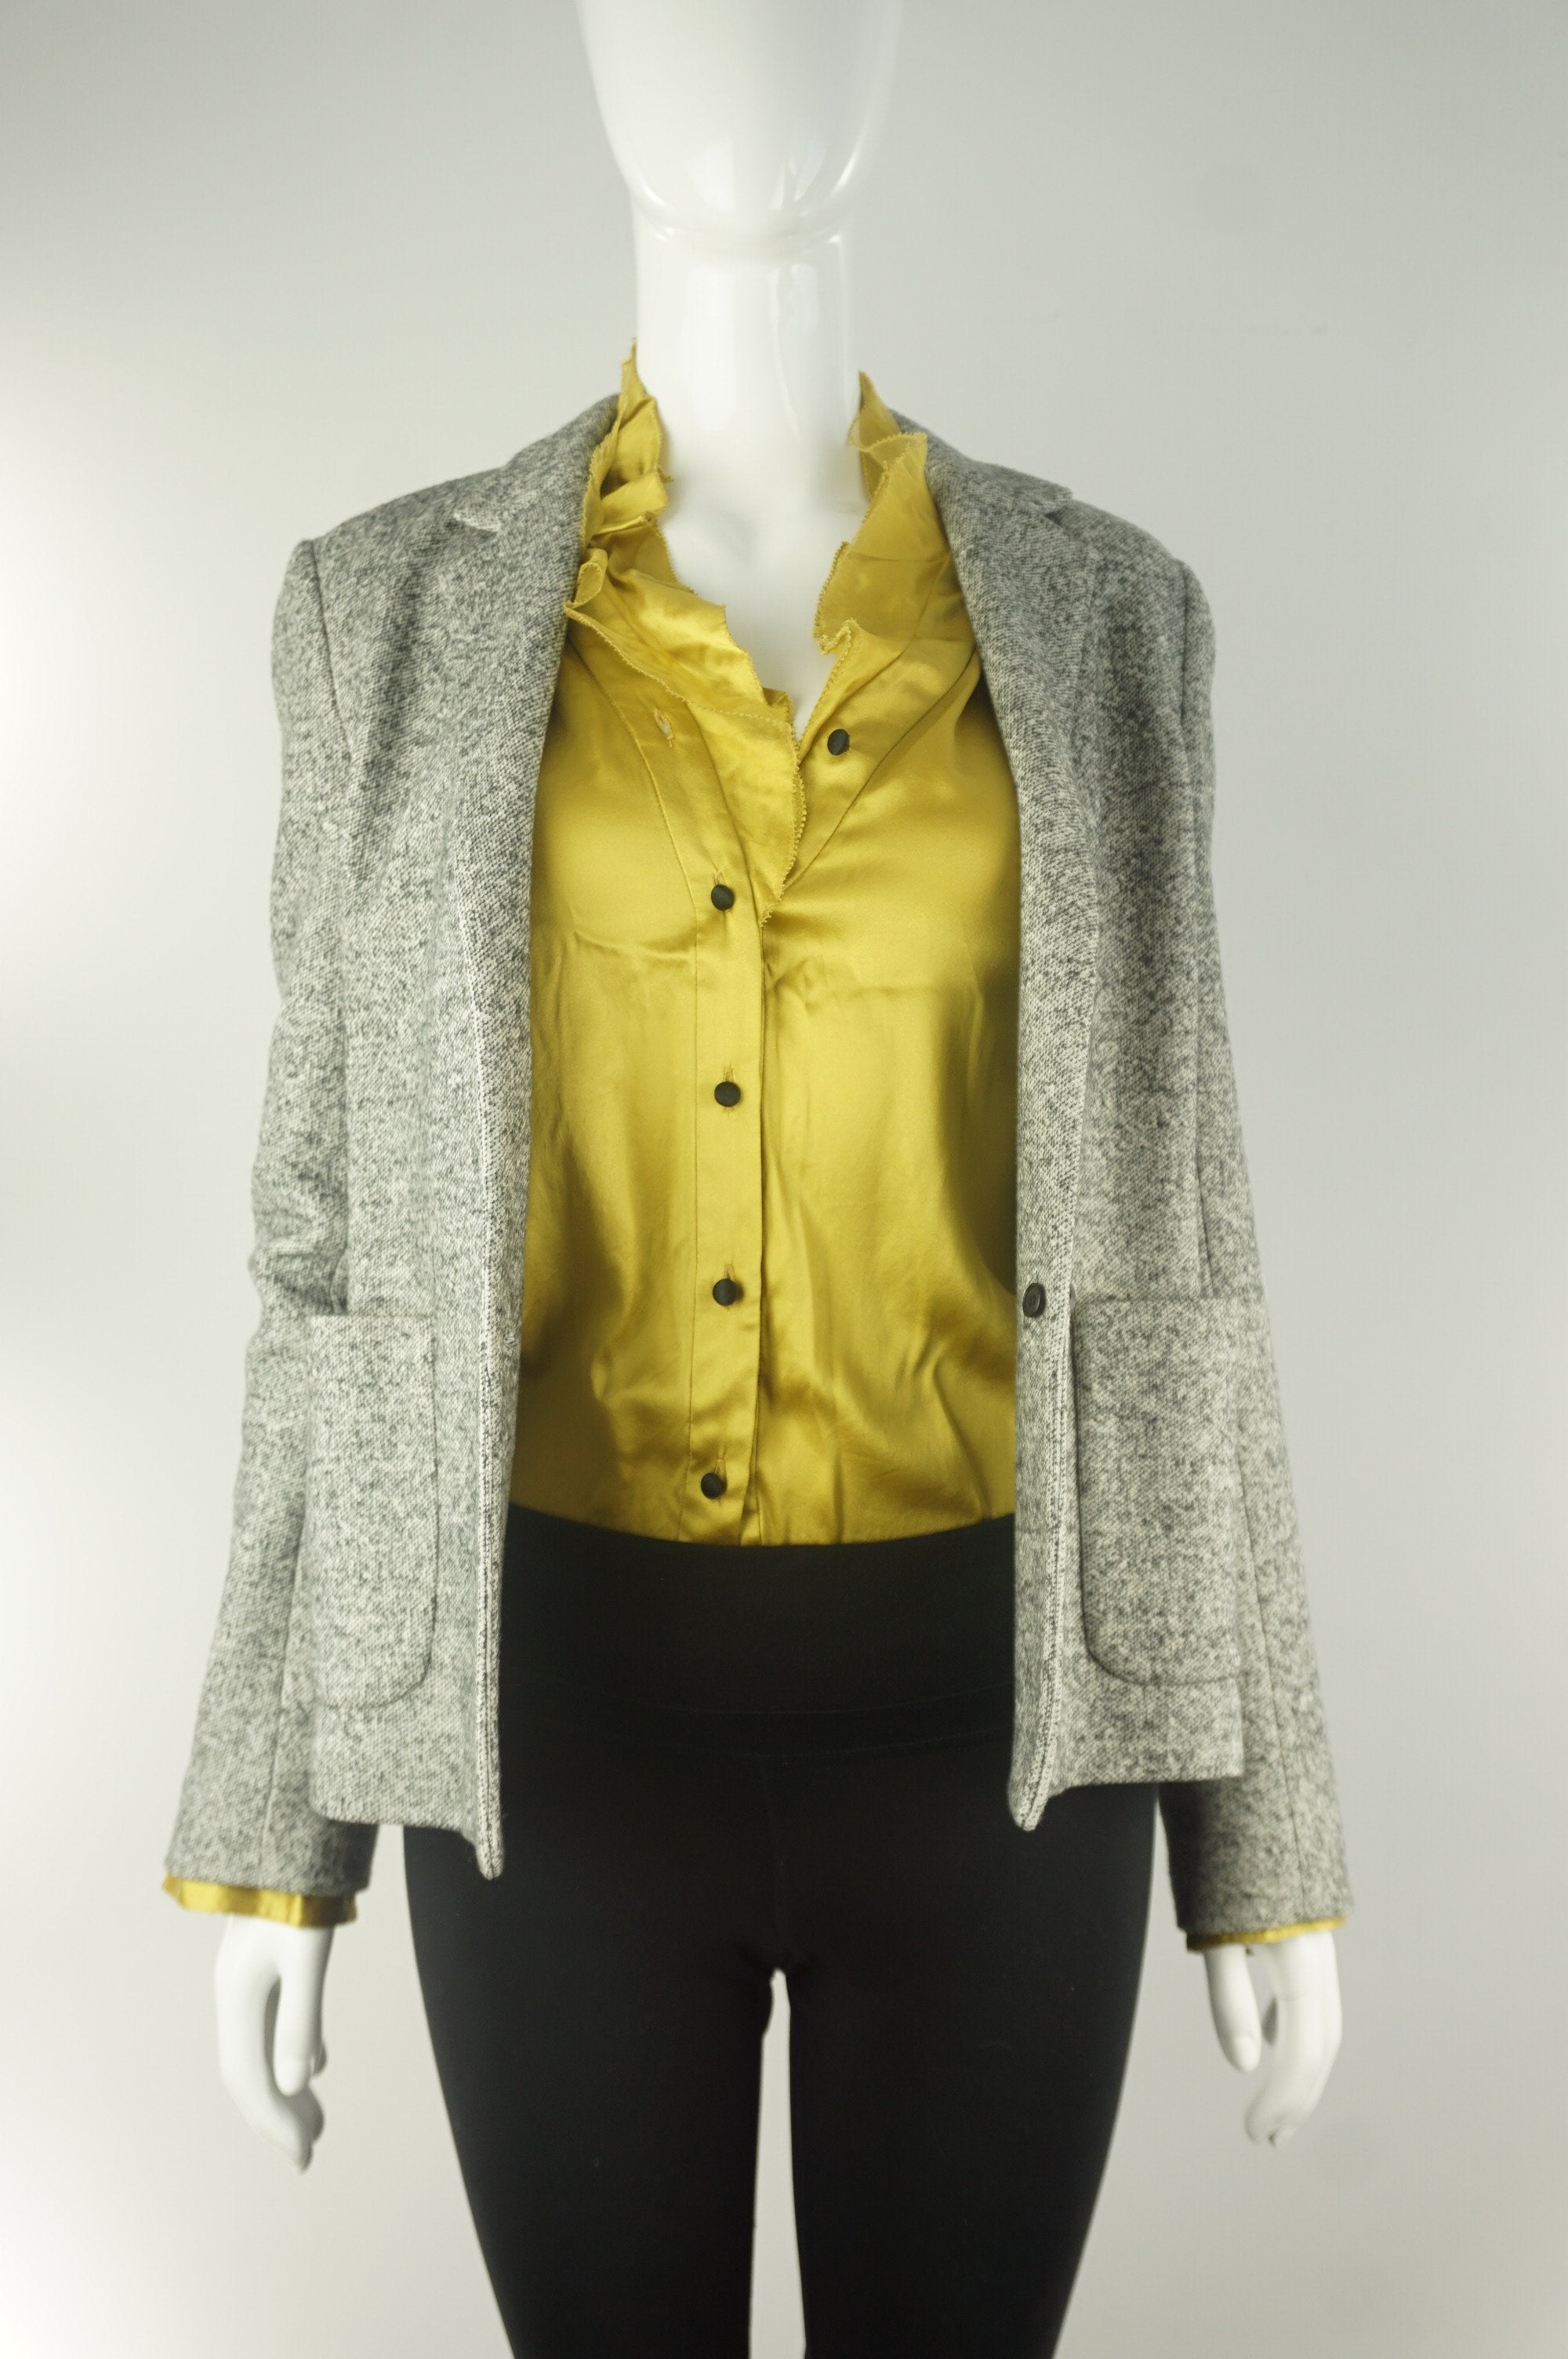 Elli Share Pure Silk Dress Shirt, Super light silk shirt with added spandex for stretchiness and comfort. Stylish on its own or with a kickass blazer.  Labeled Size M but fits Small., Yellow, 97% Silk, 3% Spandex, women's Tops, women's Yellow Tops, Elli Share women's Tops, silk work collar shirt with ruffle neck, silk professional collar shirt